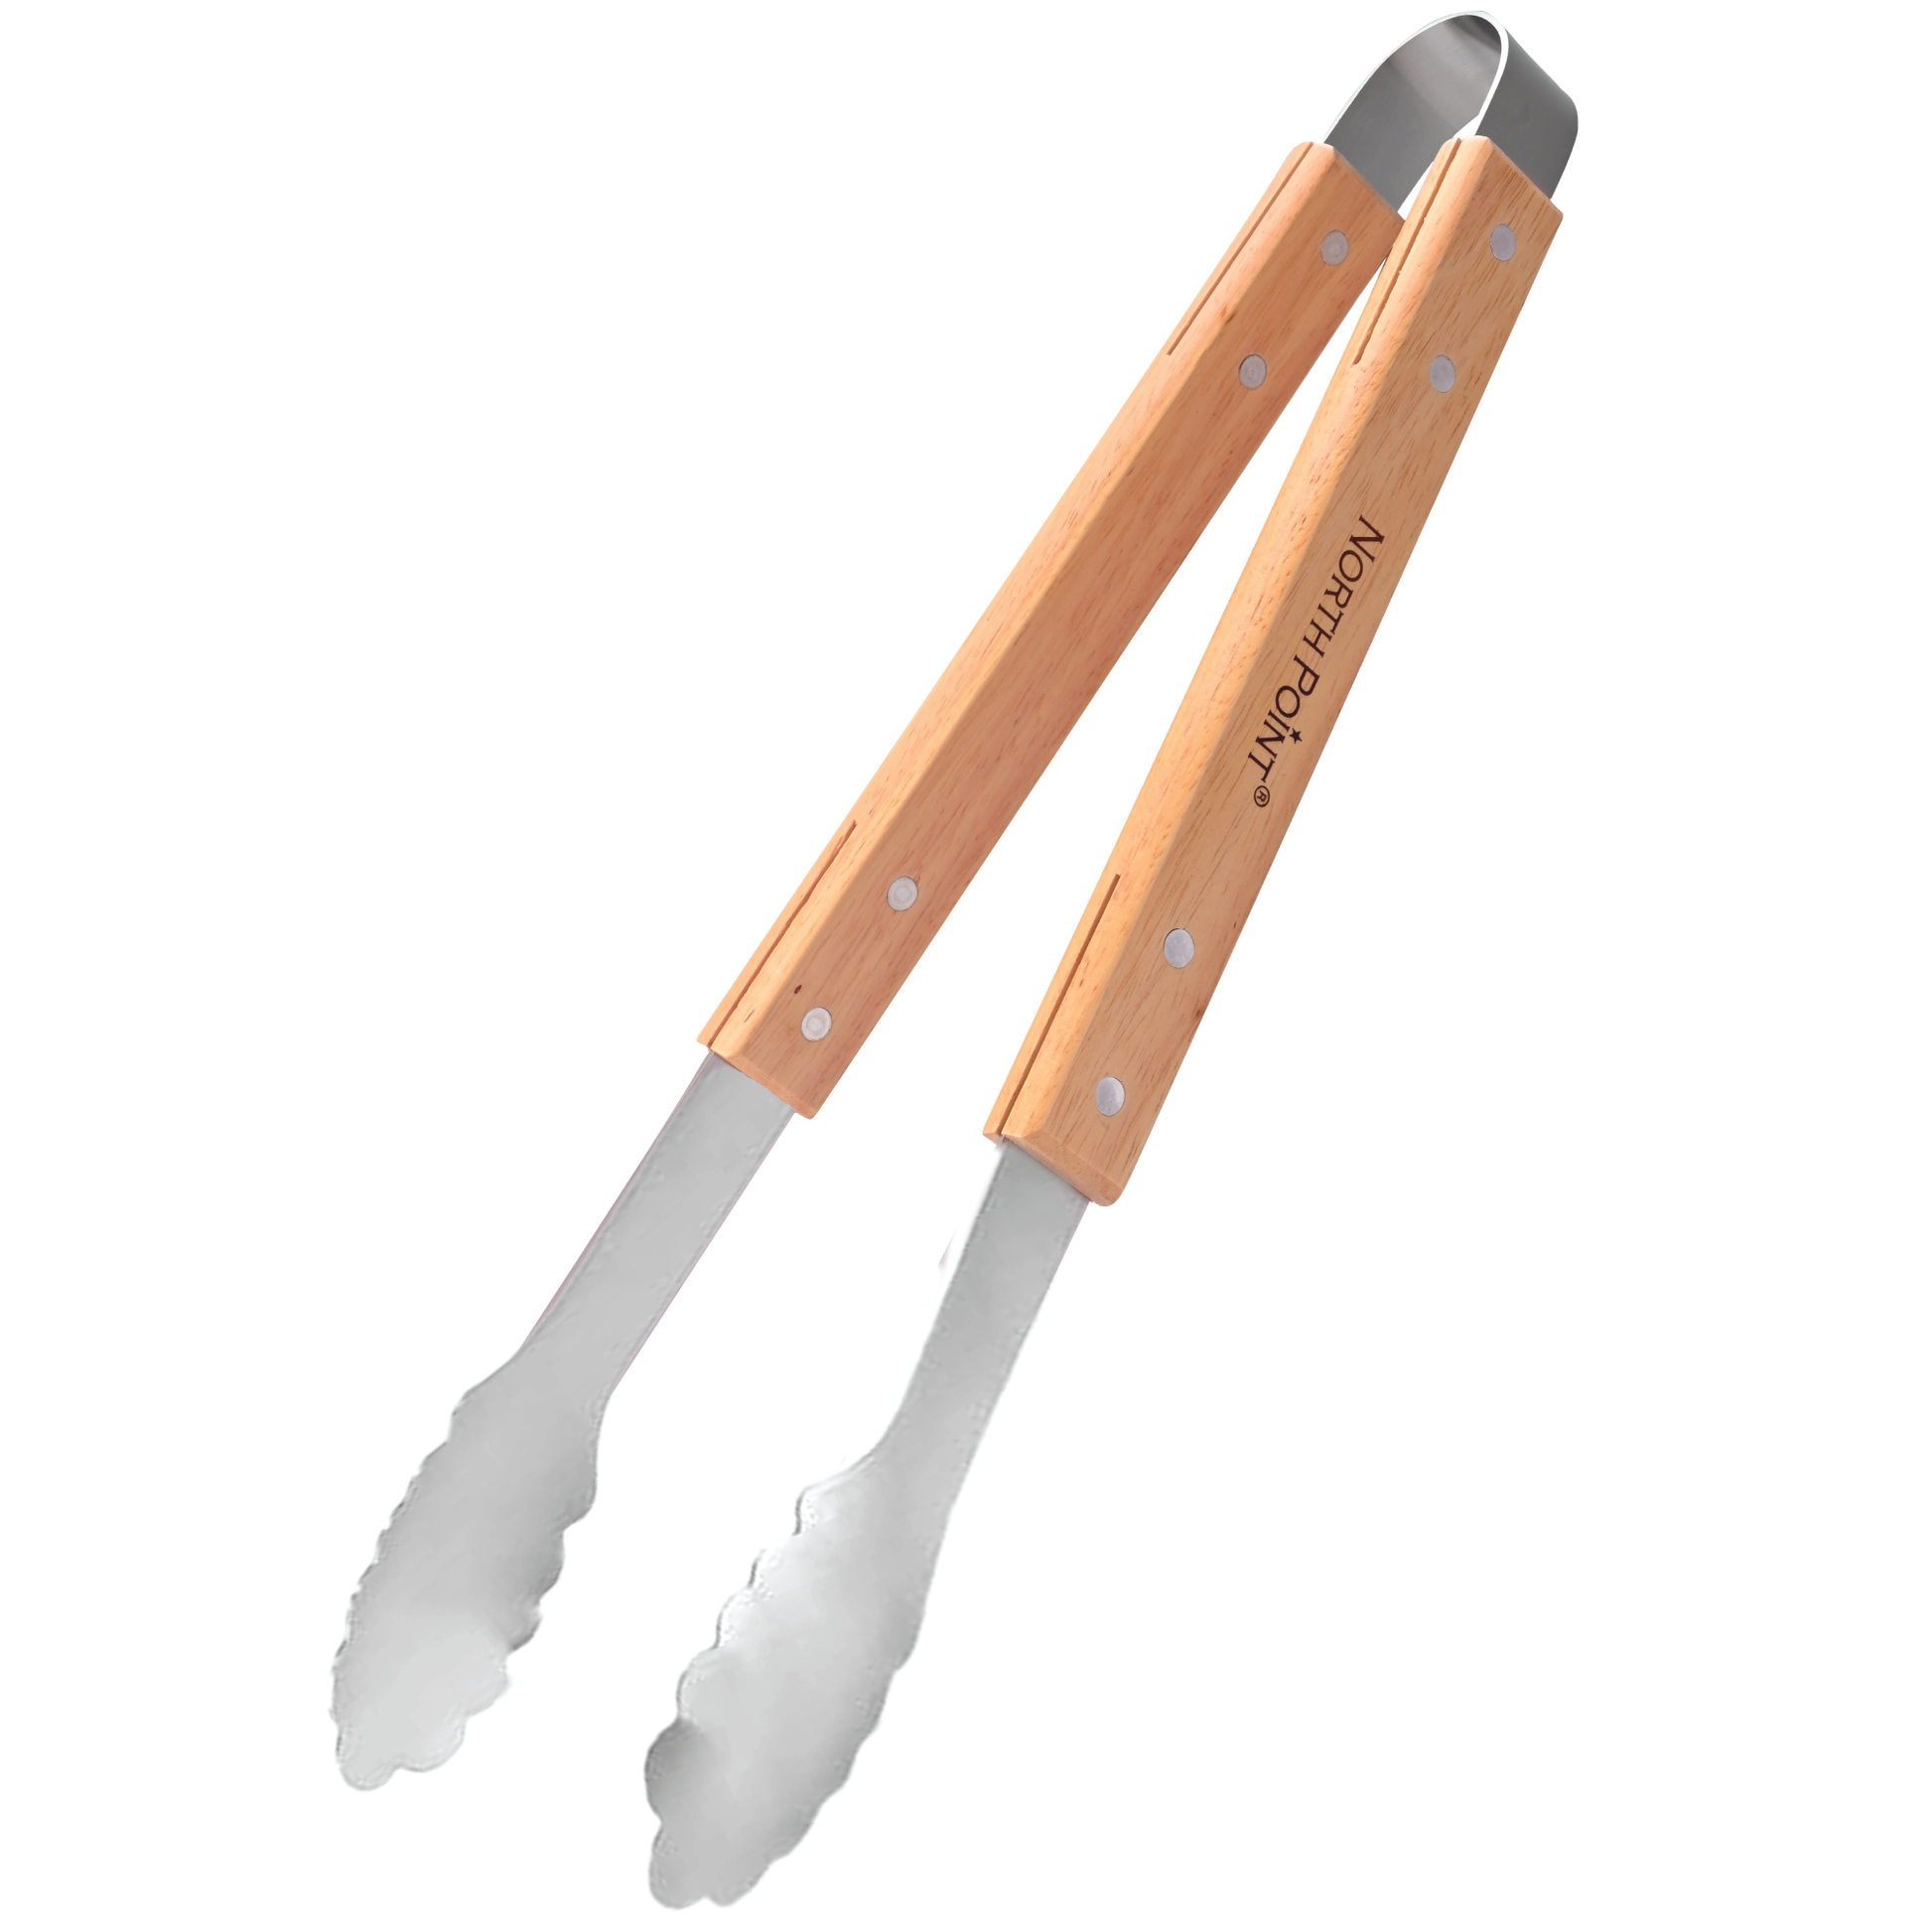 North Point® stainless steel Tongs with wooden handle